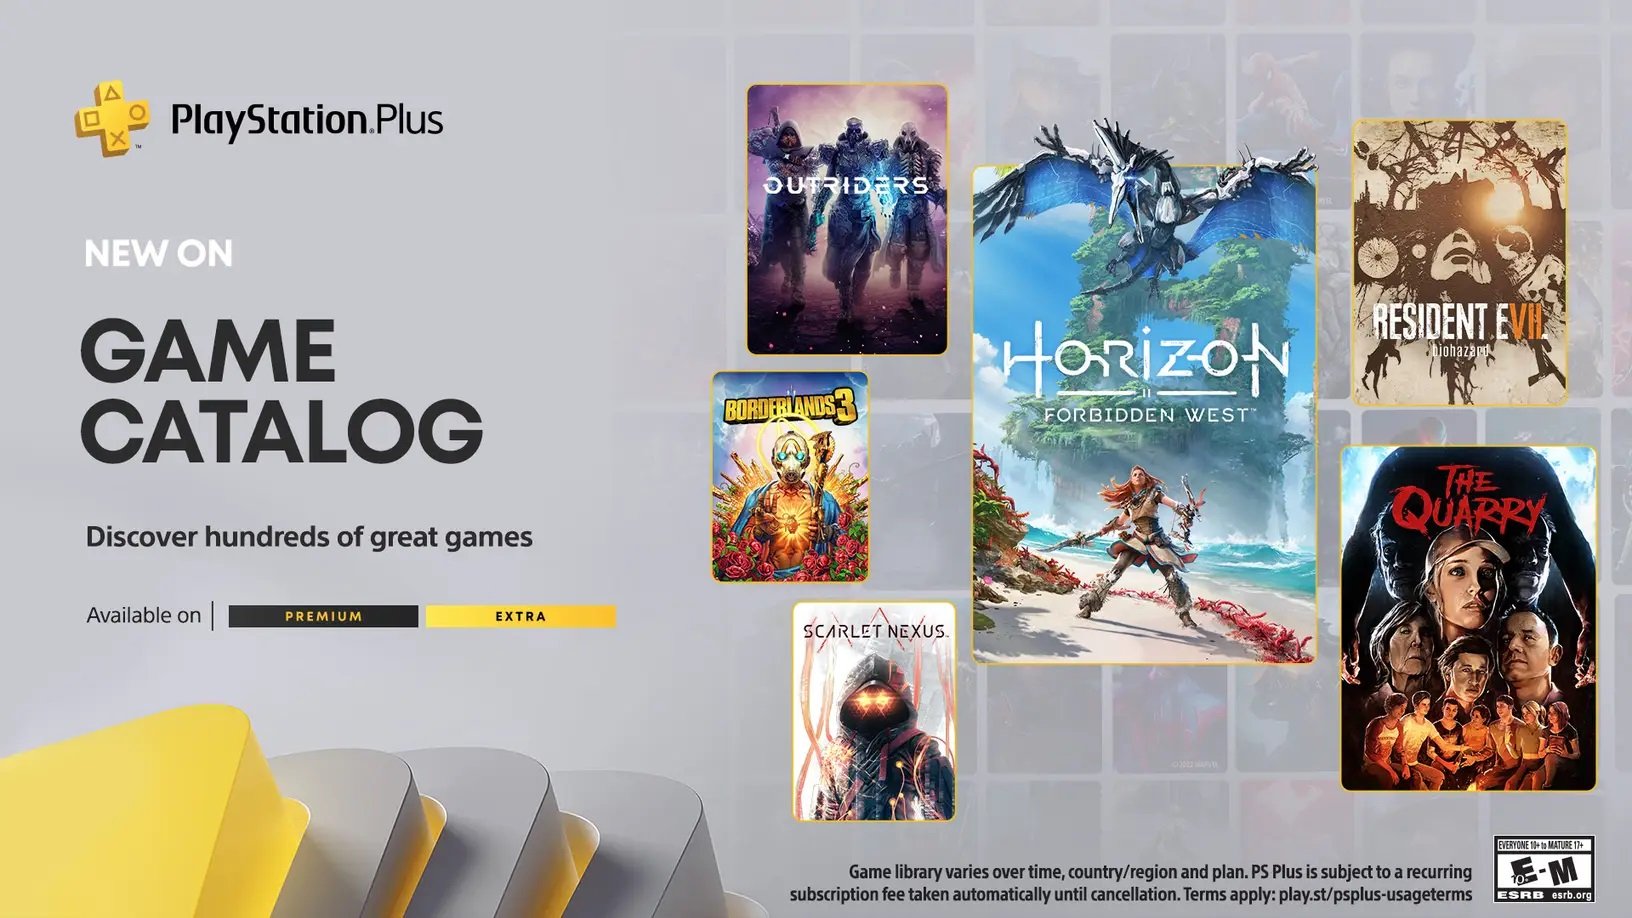 Back 4 Blood, Dragon Ball FighterZ, Life is Strange Free with PS